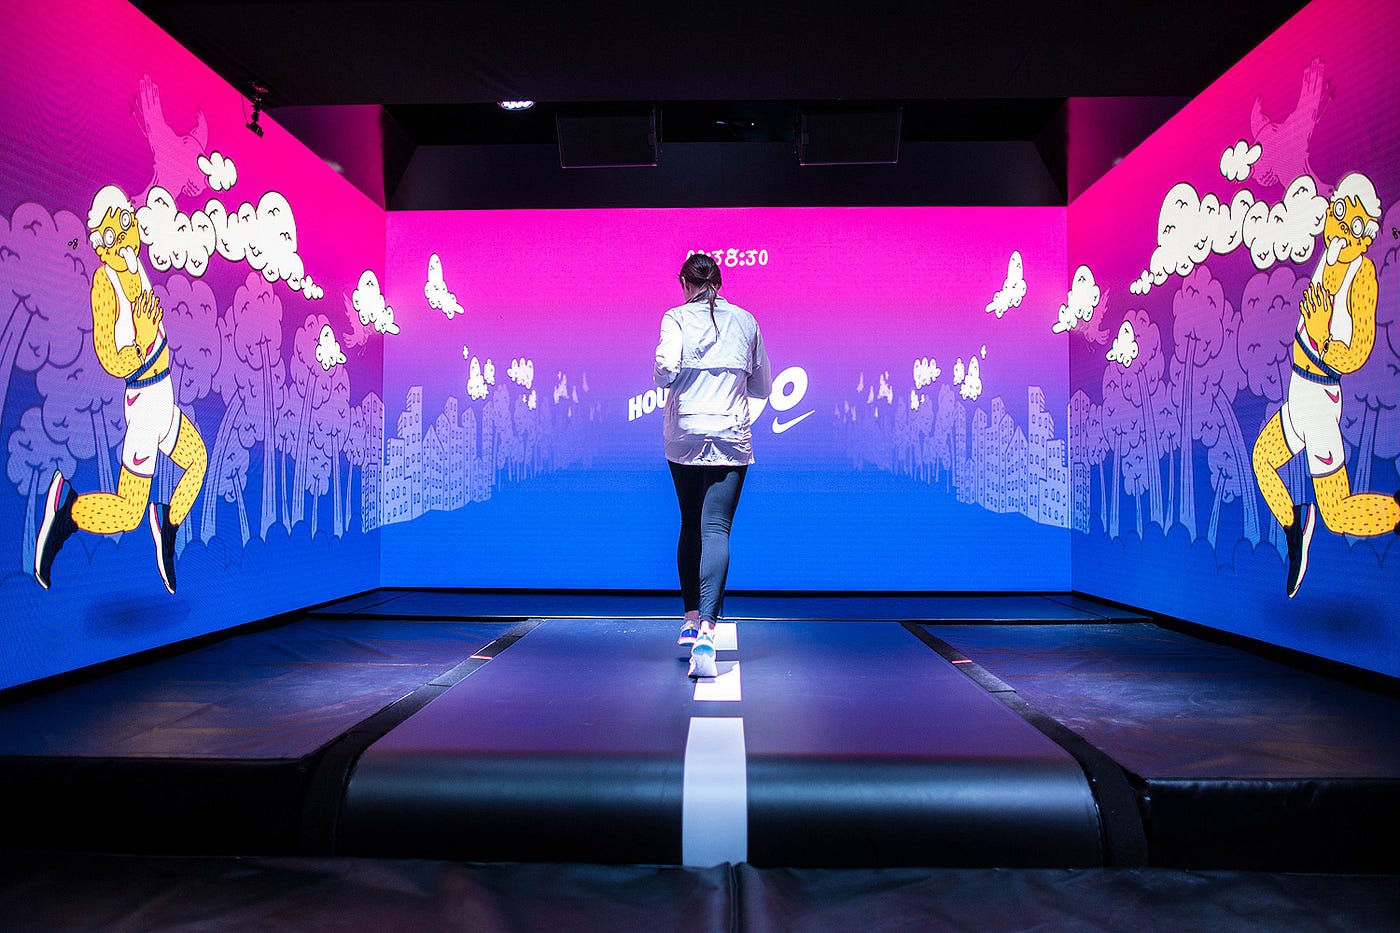 Clothes in Virtual World-Nike. As a highly influential sports brand… | by  Cailin Hu | Marketing in the Age of Digital | Medium